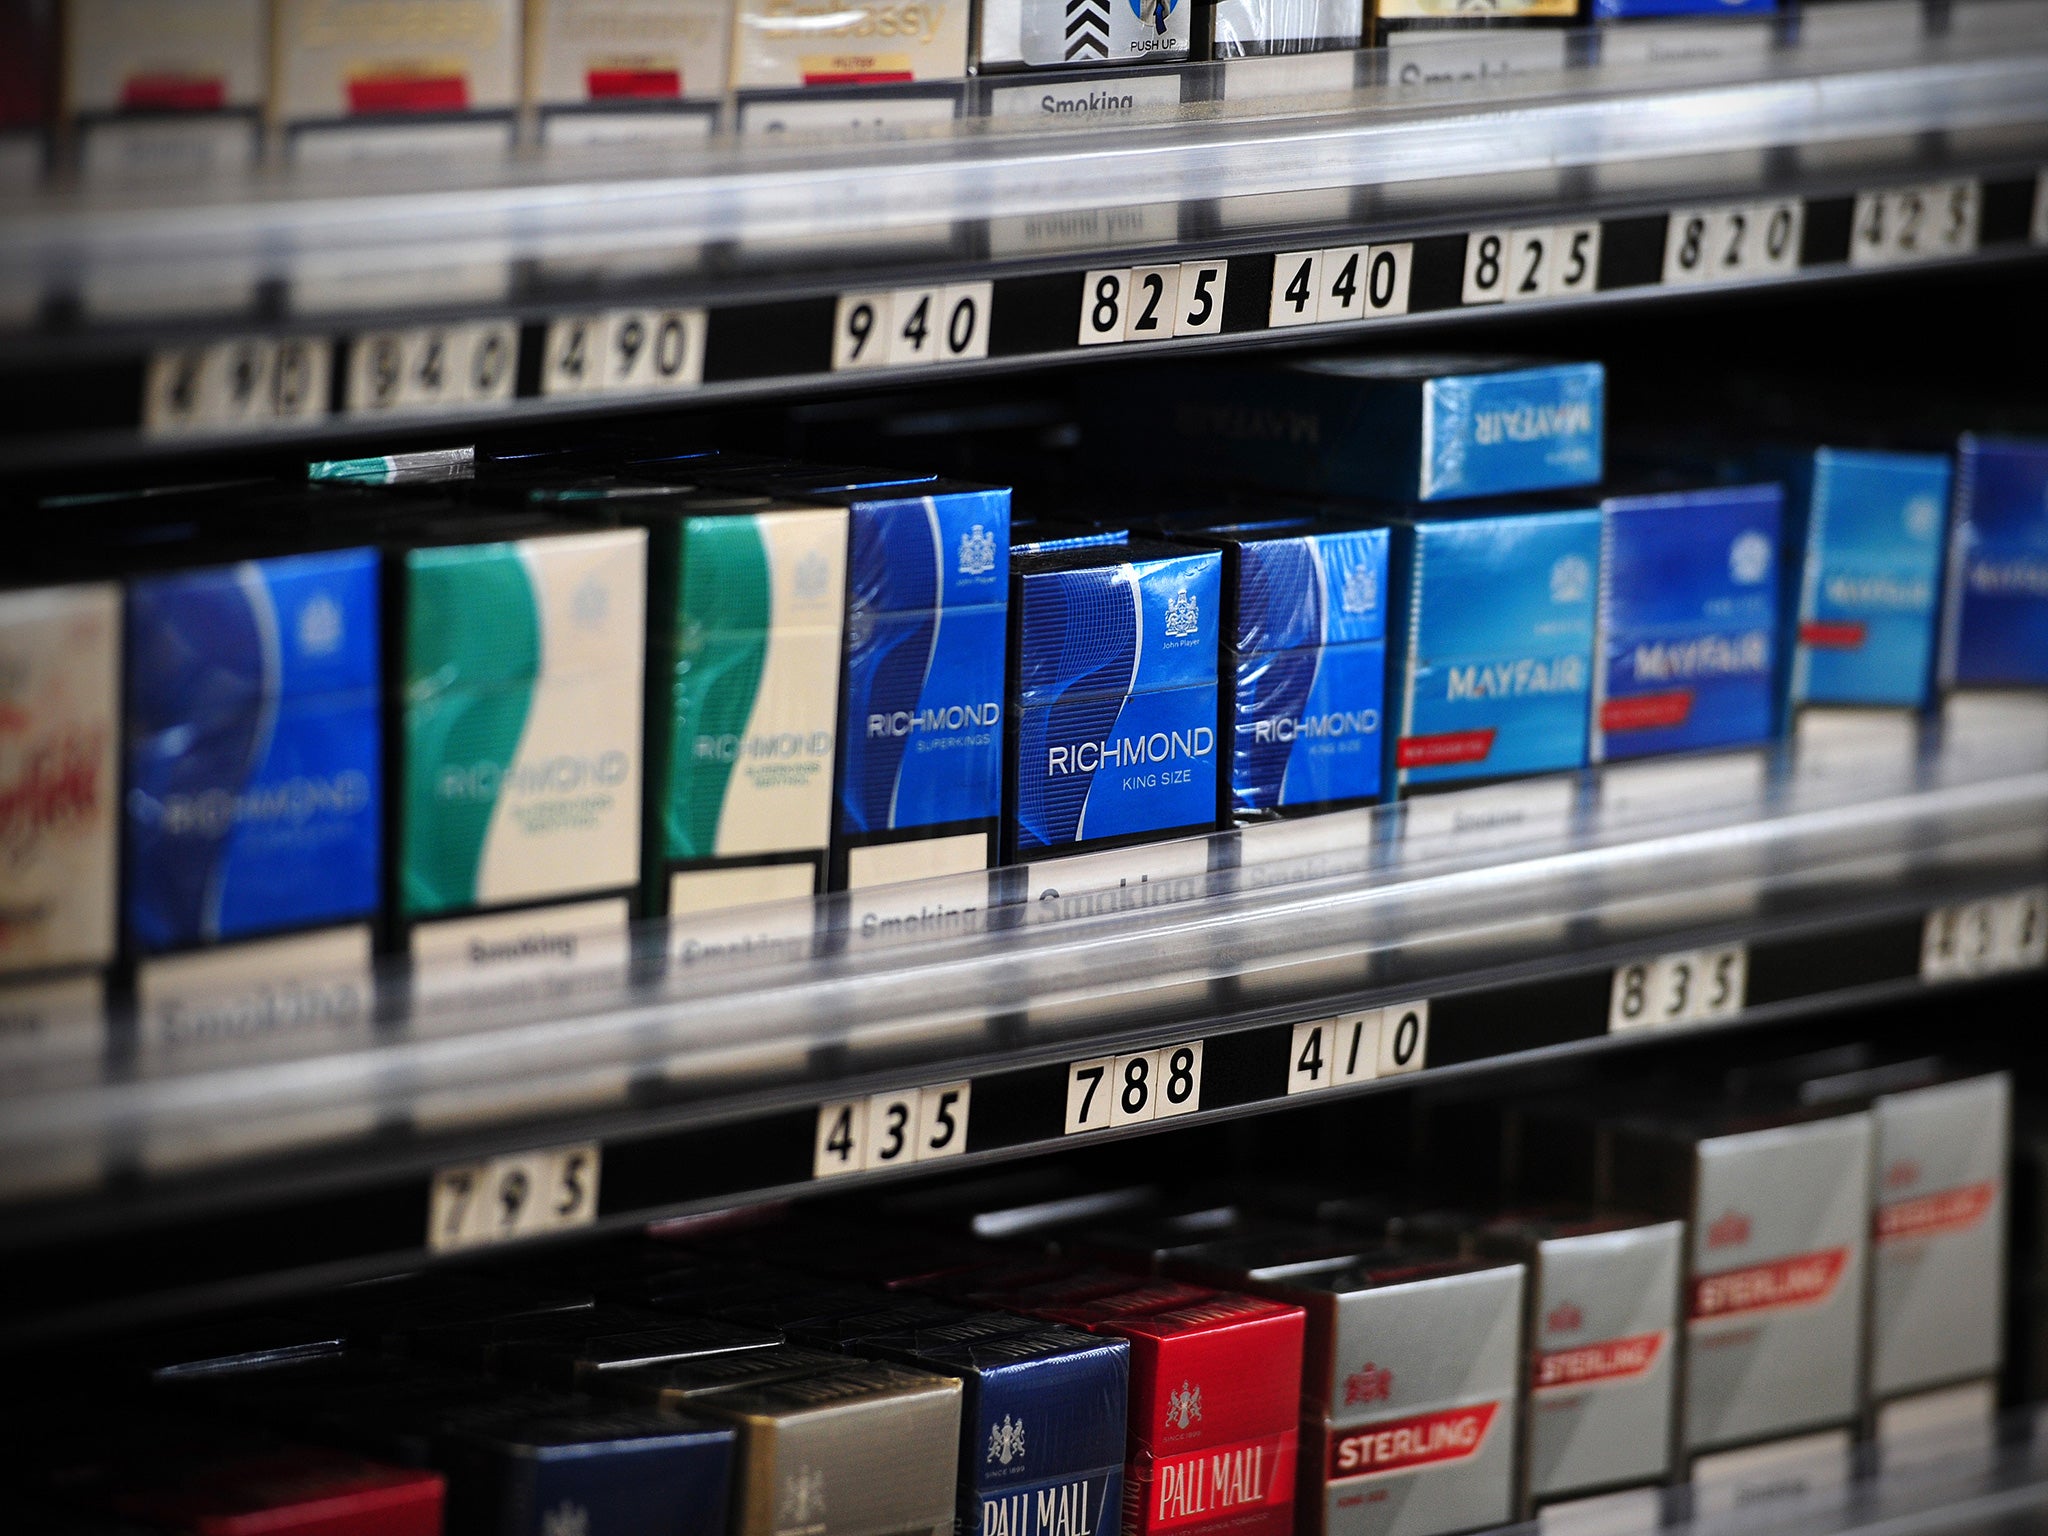 How tobacco firms flout UK law on plain packaging, Smoking